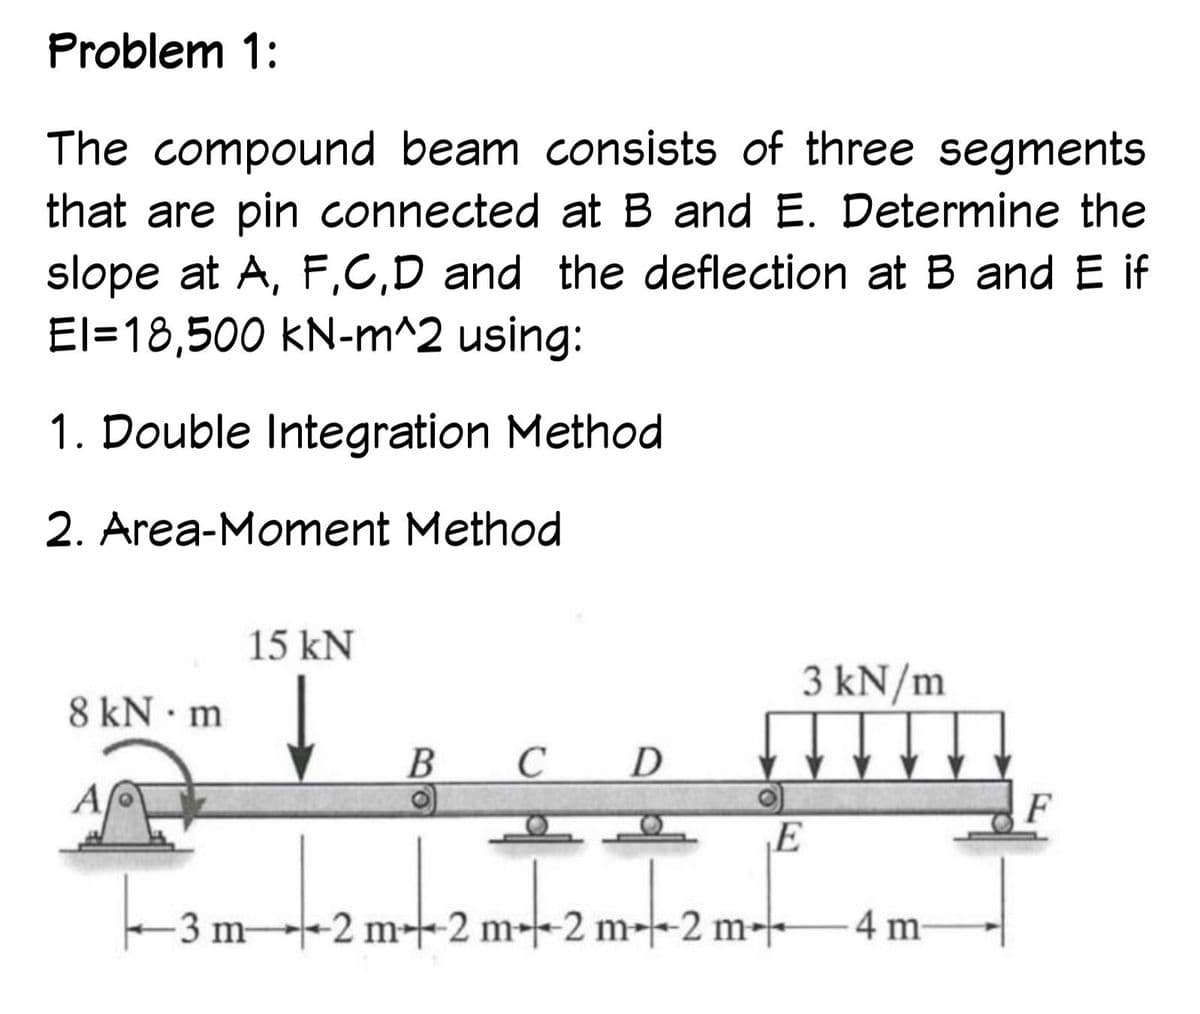 Problem 1:
The compound beam consists of three segments
that are pin connected at B and E. Determine the
slope at A, F,C,D and the deflection at B and E if
El=18,500 kN-m^2 using:
1. Double Integration Method
2. Area-Moment Method
8 kN - m
15 kN
B
C D
--2m-- 2m
3 kN/m
E
3 m2 m2 m2 m2 m 4 m
F